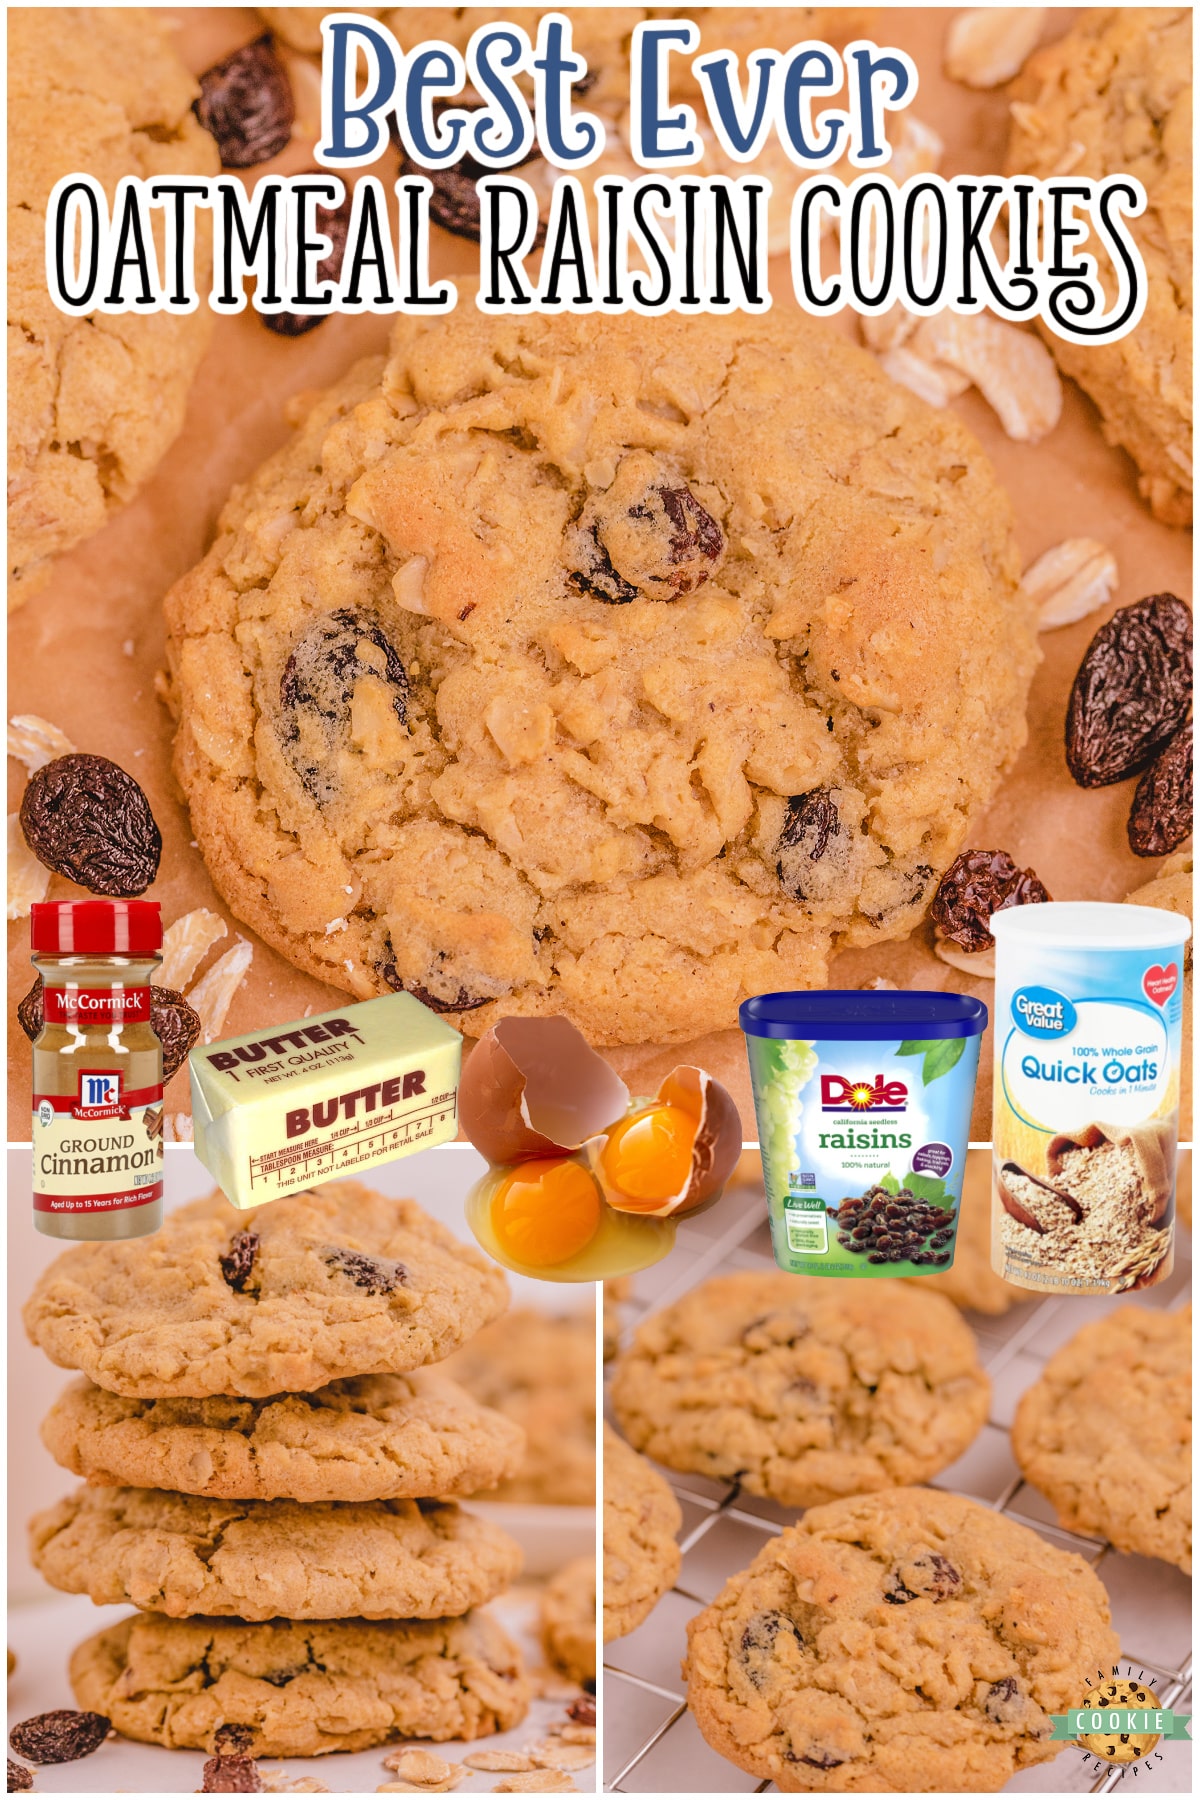 Oatmeal Raisin Cookies that truly are the BEST EVER! Oatmeal, raisins, pudding mix & spices combine in most delicious, soft & chewy Oatmeal Raisin Cookies you've ever tasted.